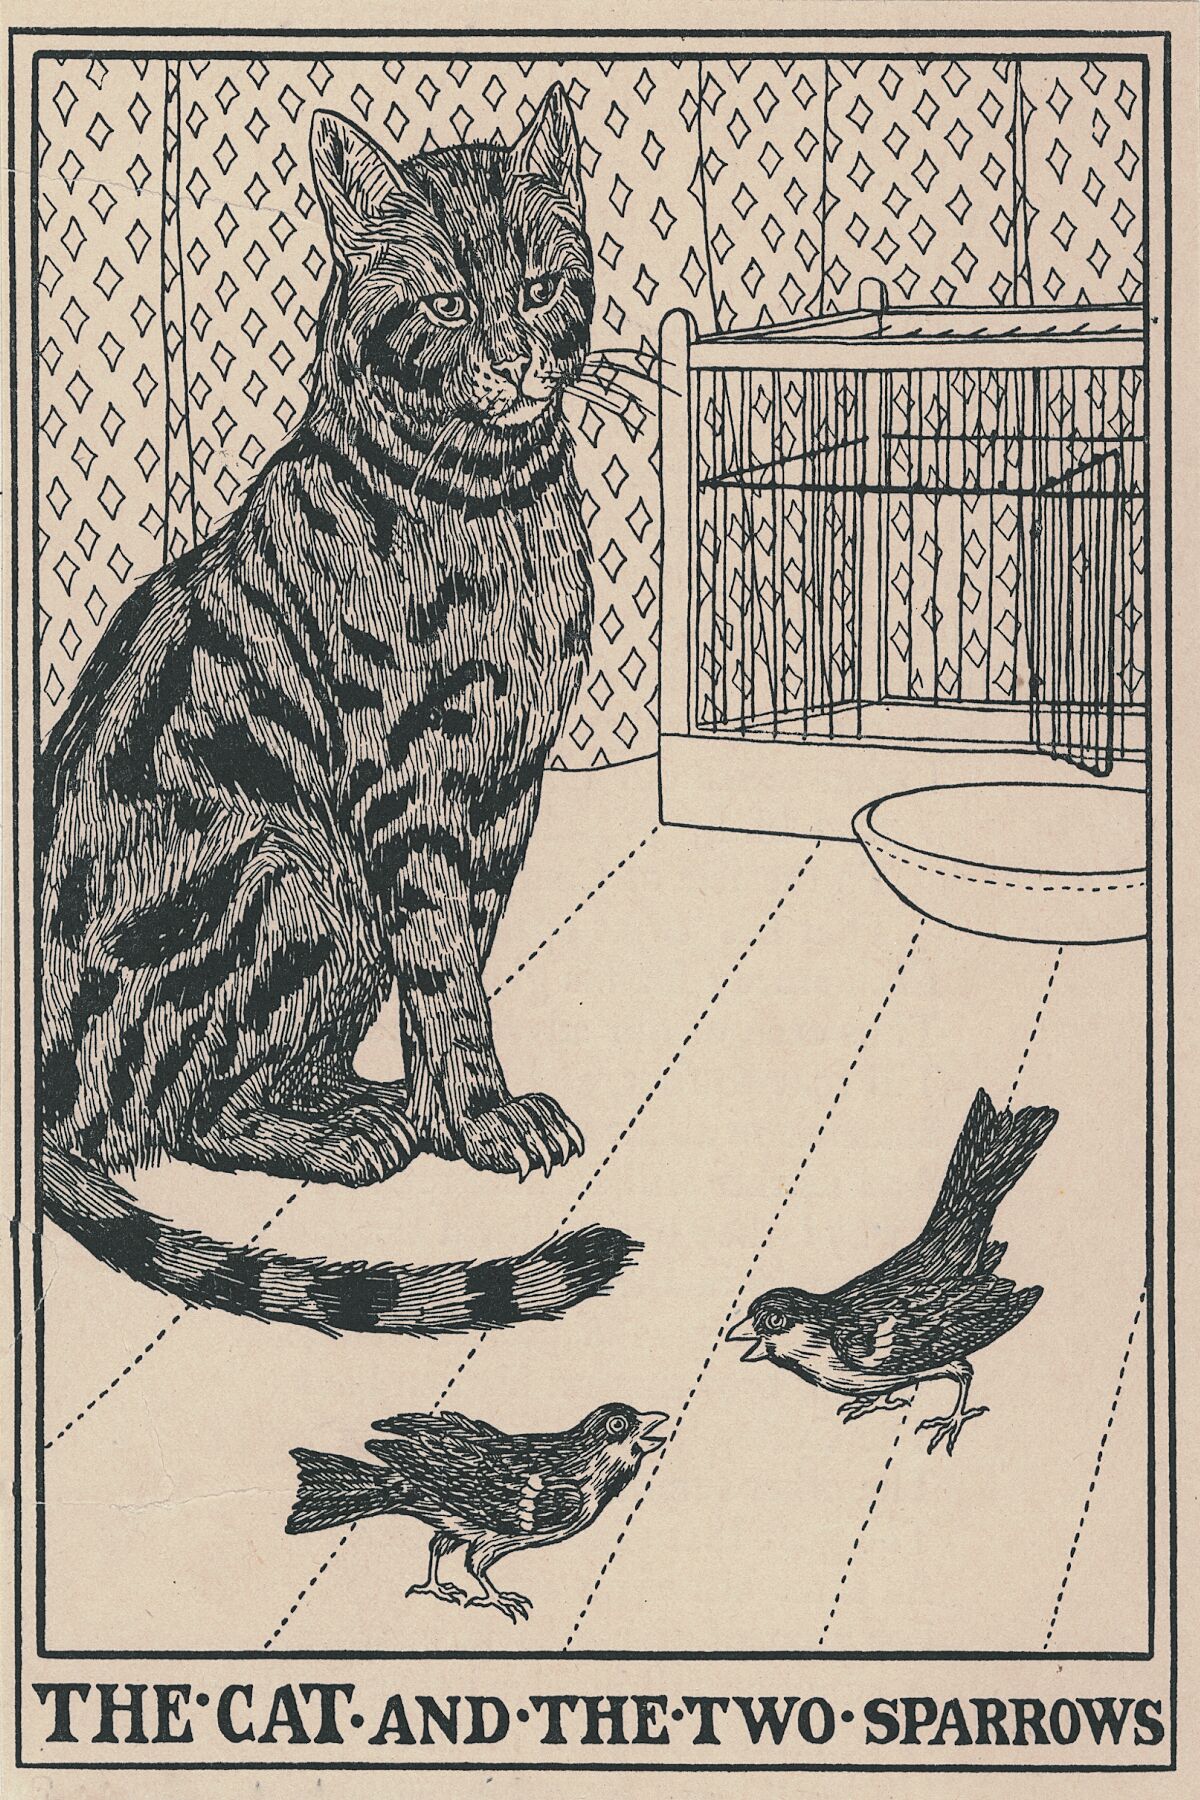 The Cat and Two Sparrows by Percy J. Billinghurst - 1900